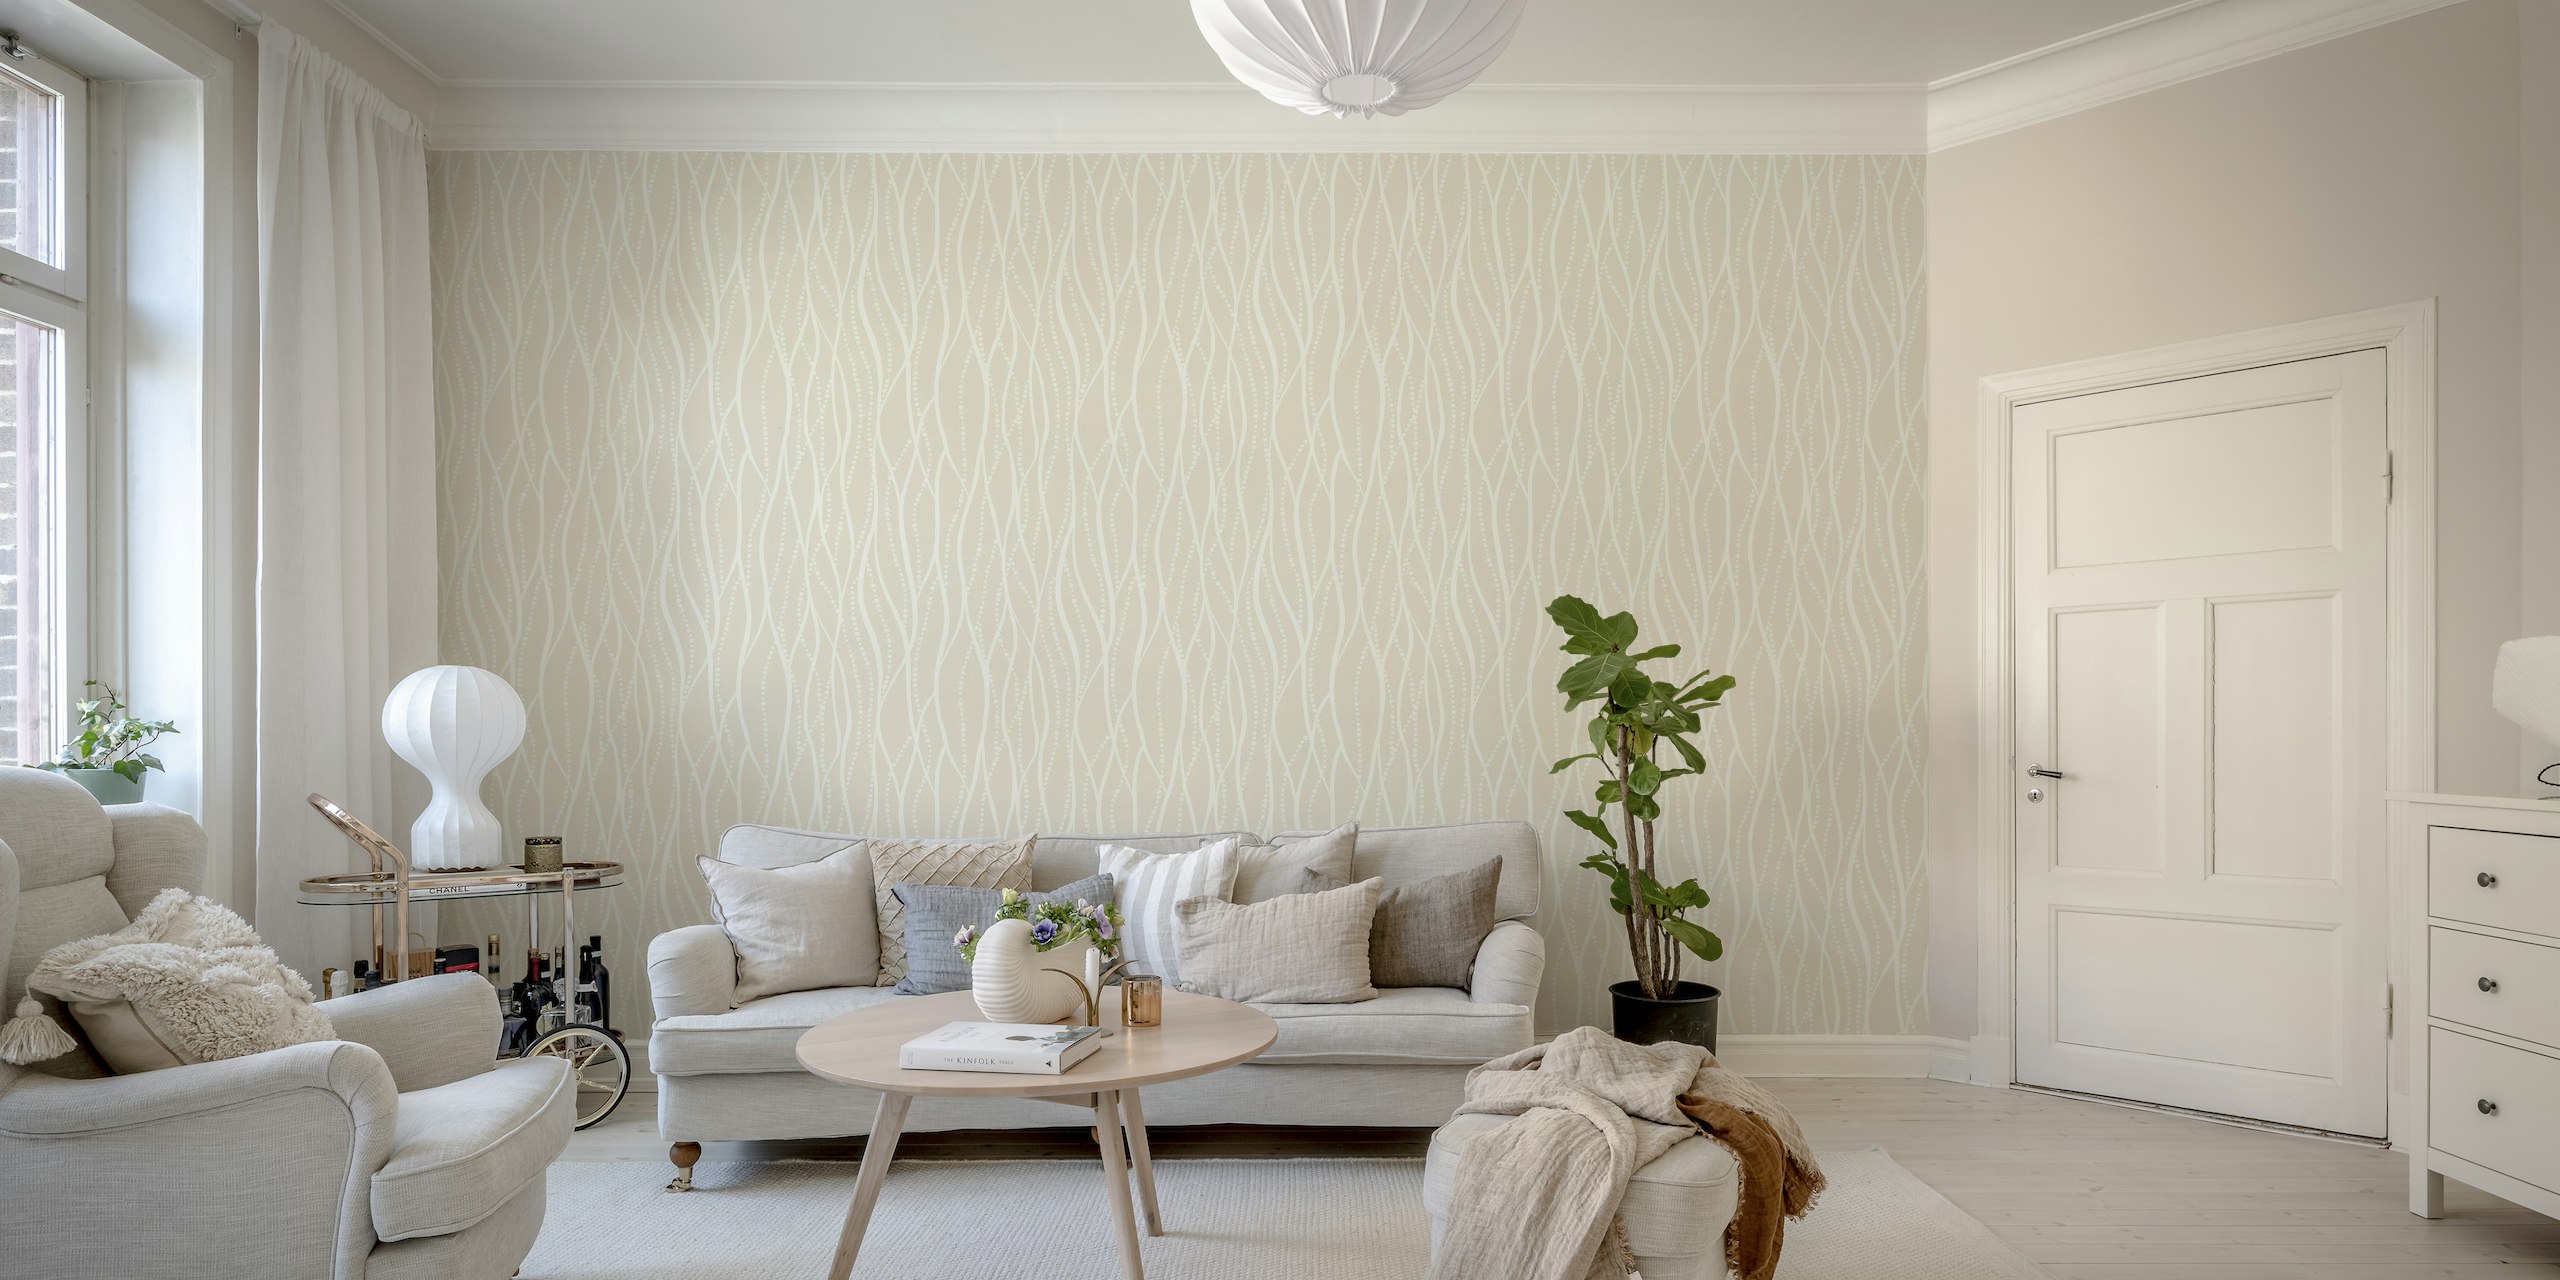 Abstract peach cream wave patterns with dotted details for a modern wall mural